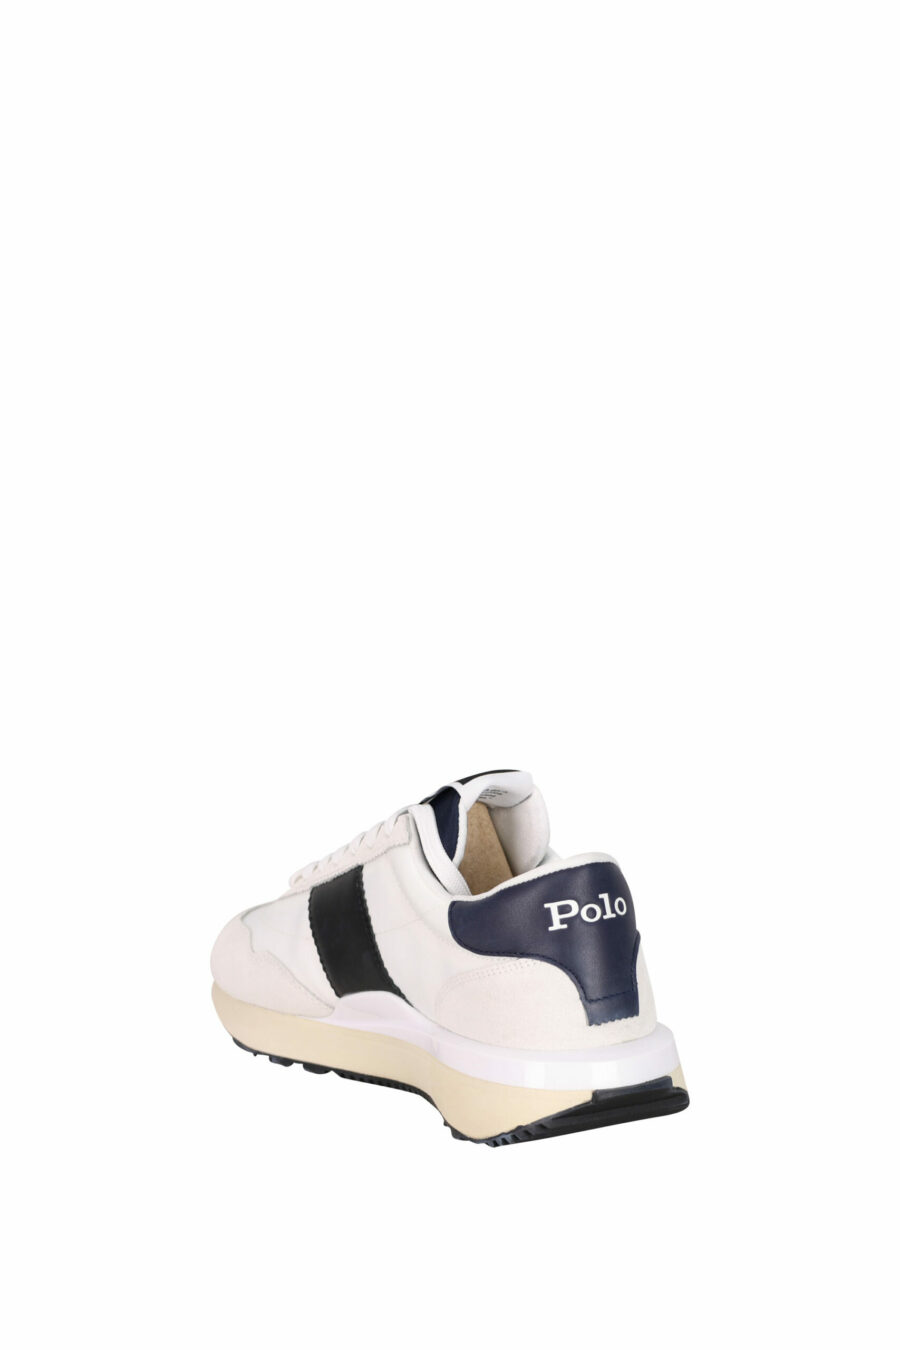 White trainers with blue "train" detail and white "polo" minilogue - 3616535114890 3 scaled